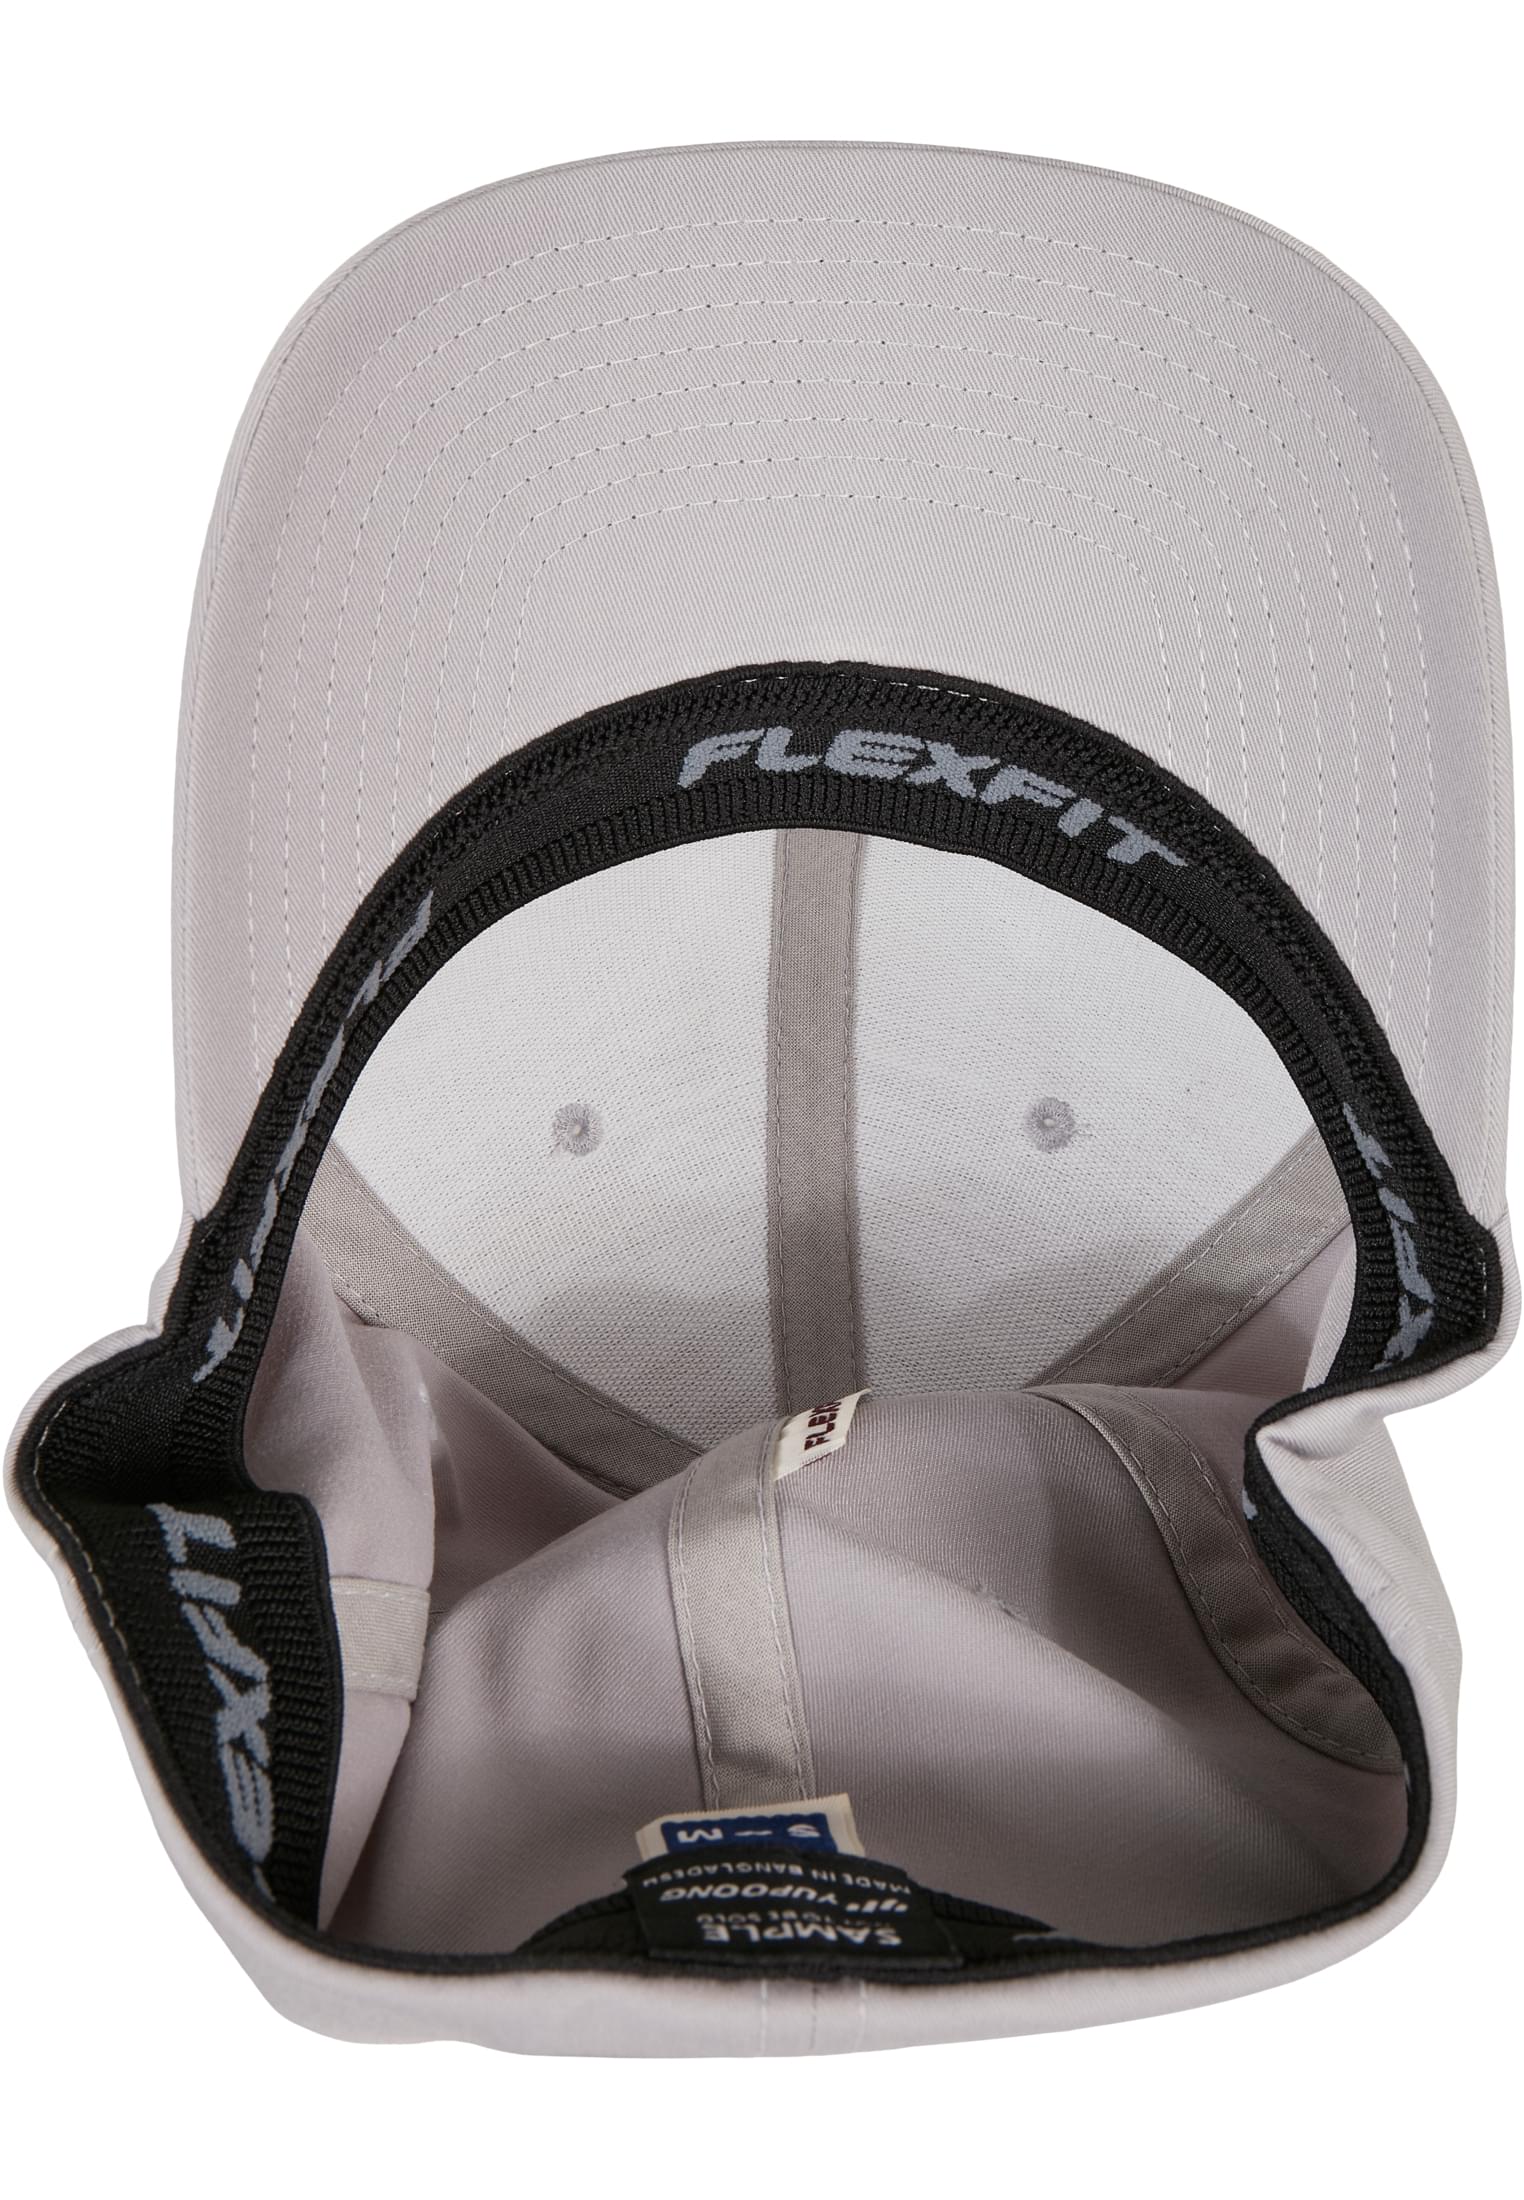 Nachhaltig Flexfit Recycled Polyester Cap in Farbe silver